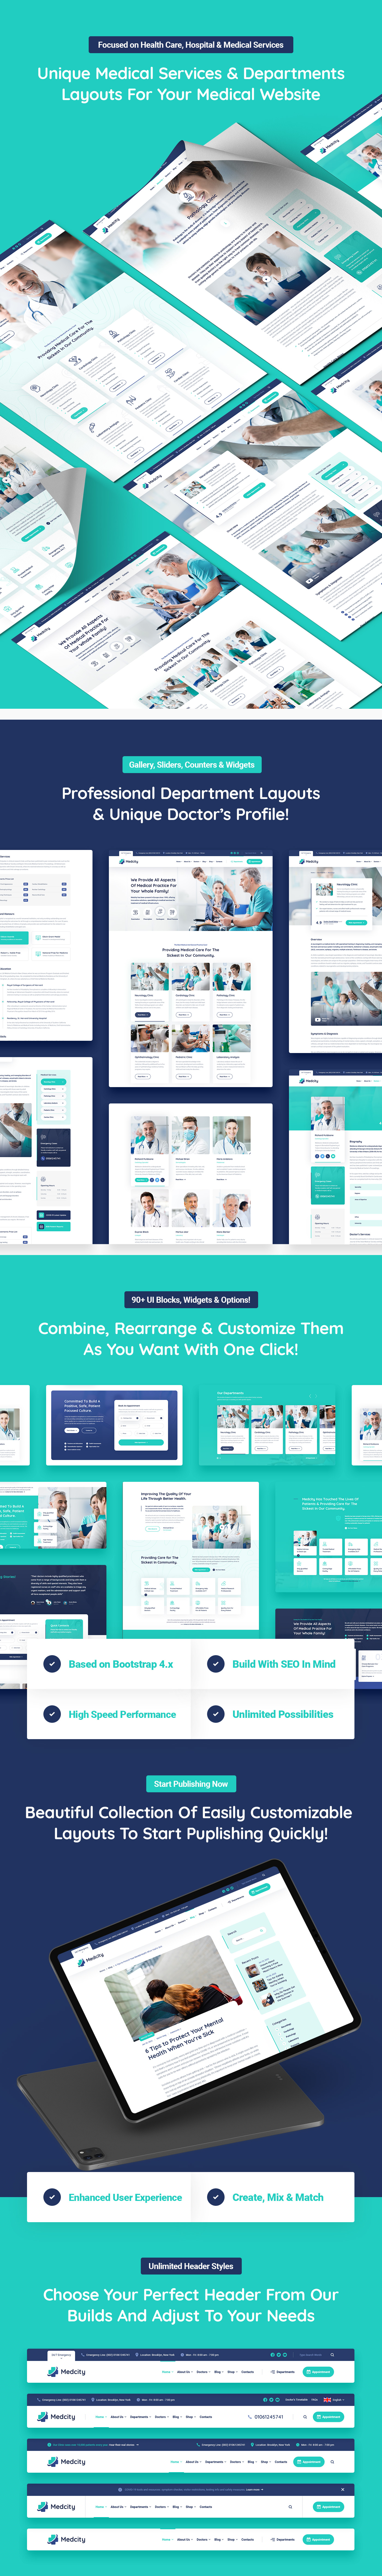 Medcity - Health & Medical HTML5 Template - 6